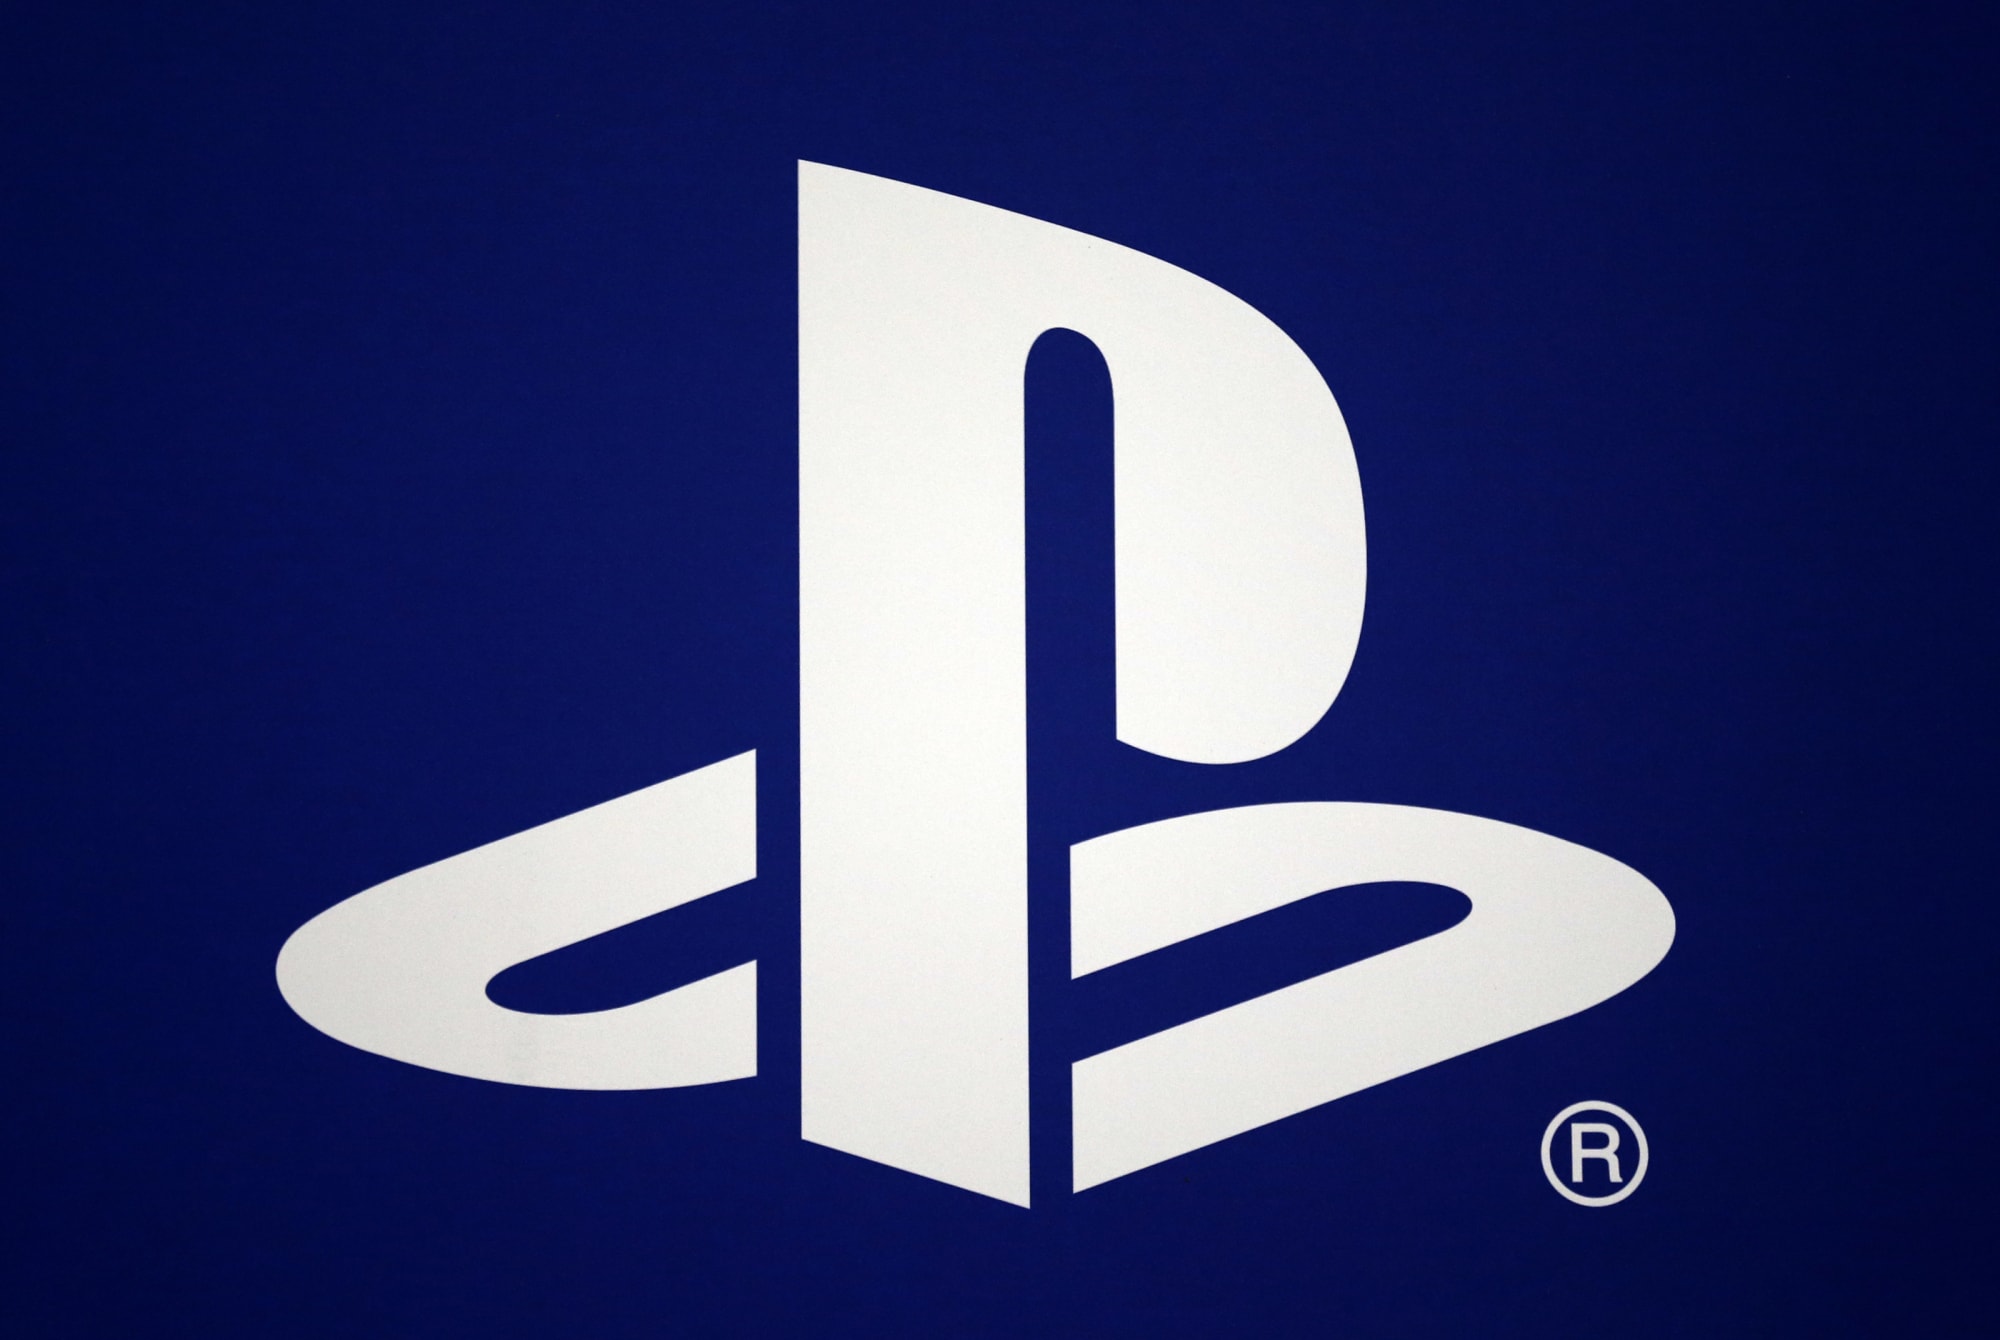 PS5: When and how to watch the PlayStation 5 Showcase